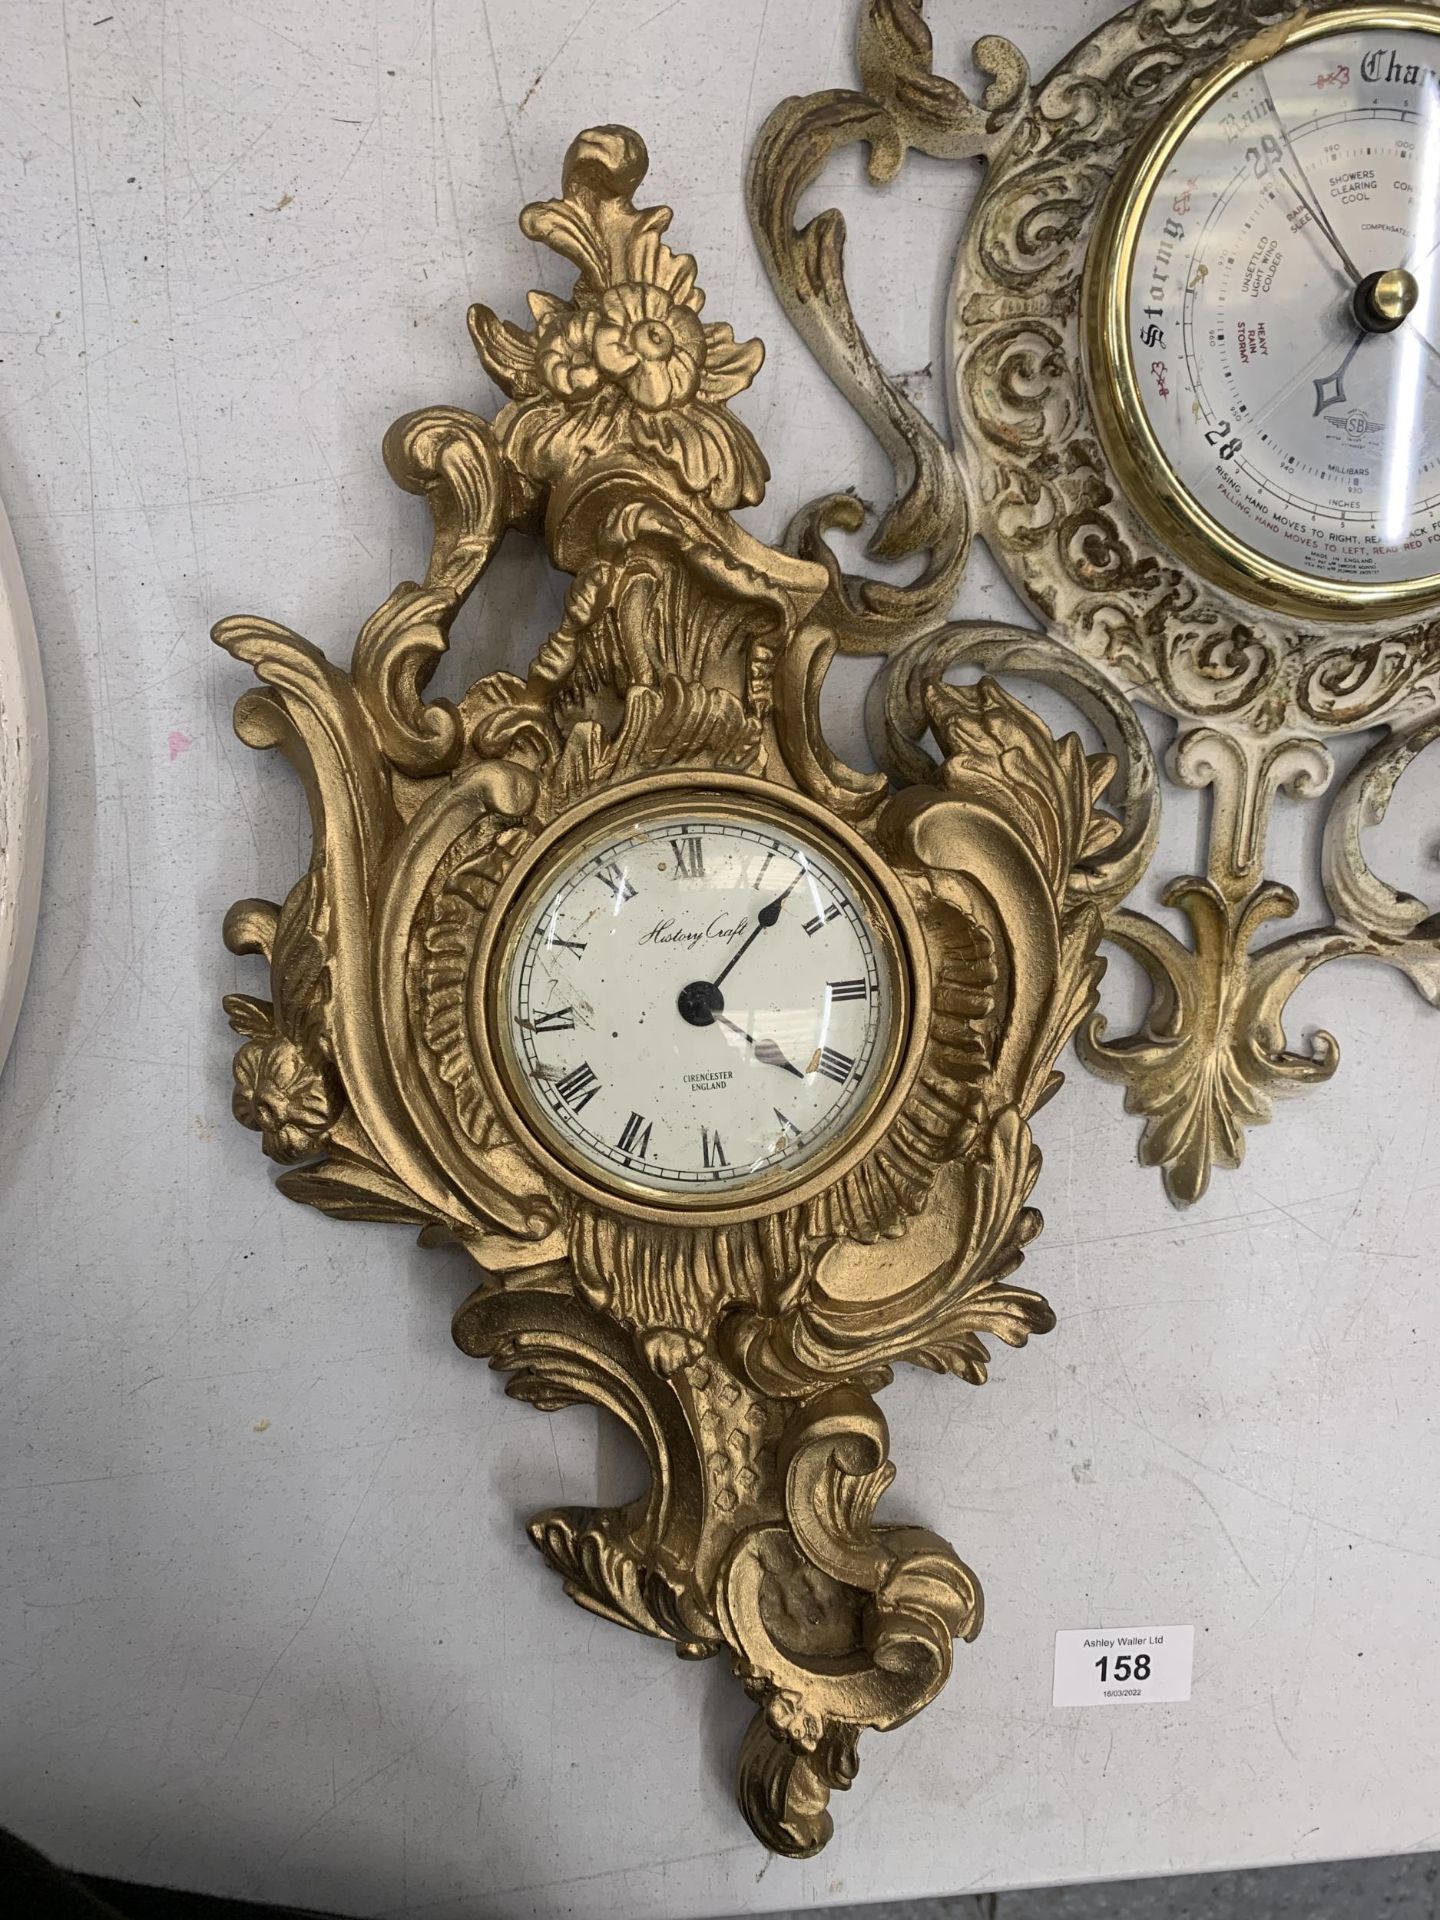 AN ORNATE STYLE RESIN BAROMETER AND A WALL CLOCK - Image 3 of 3